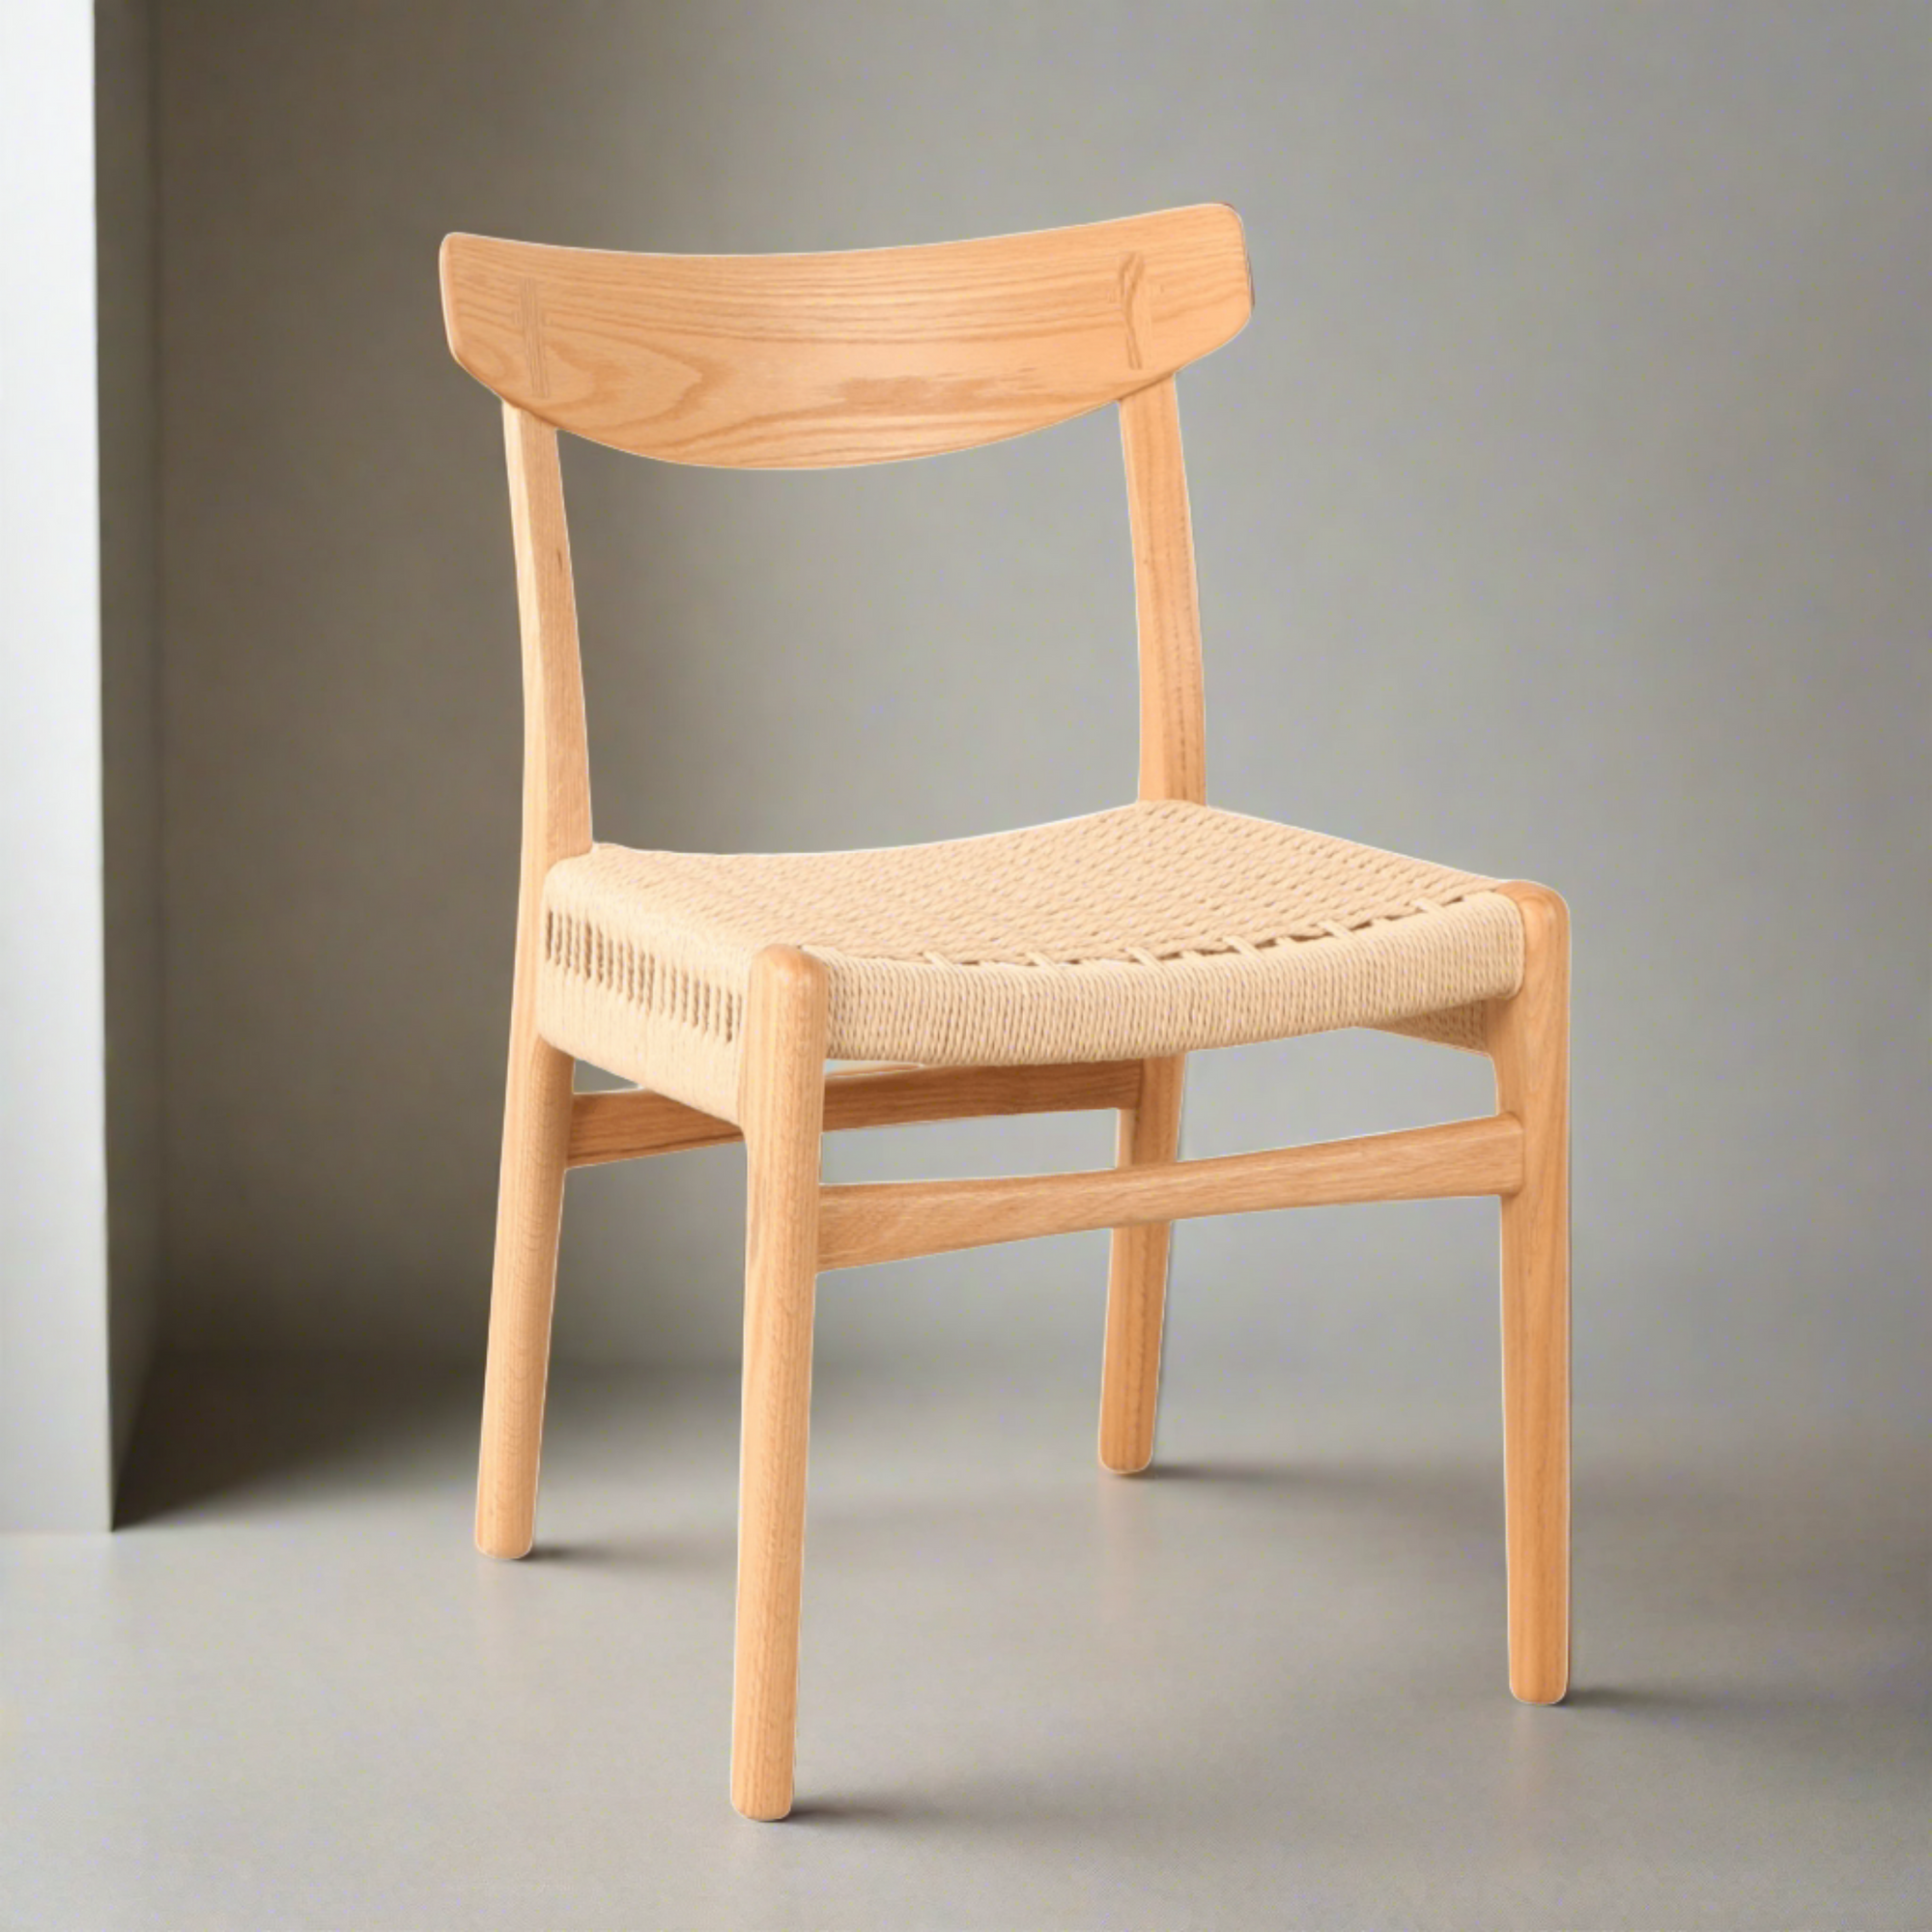 Custom Solid Wood Dining Chair with Woven Paper Cord - Veritas Chair (CH9310) picket and rail